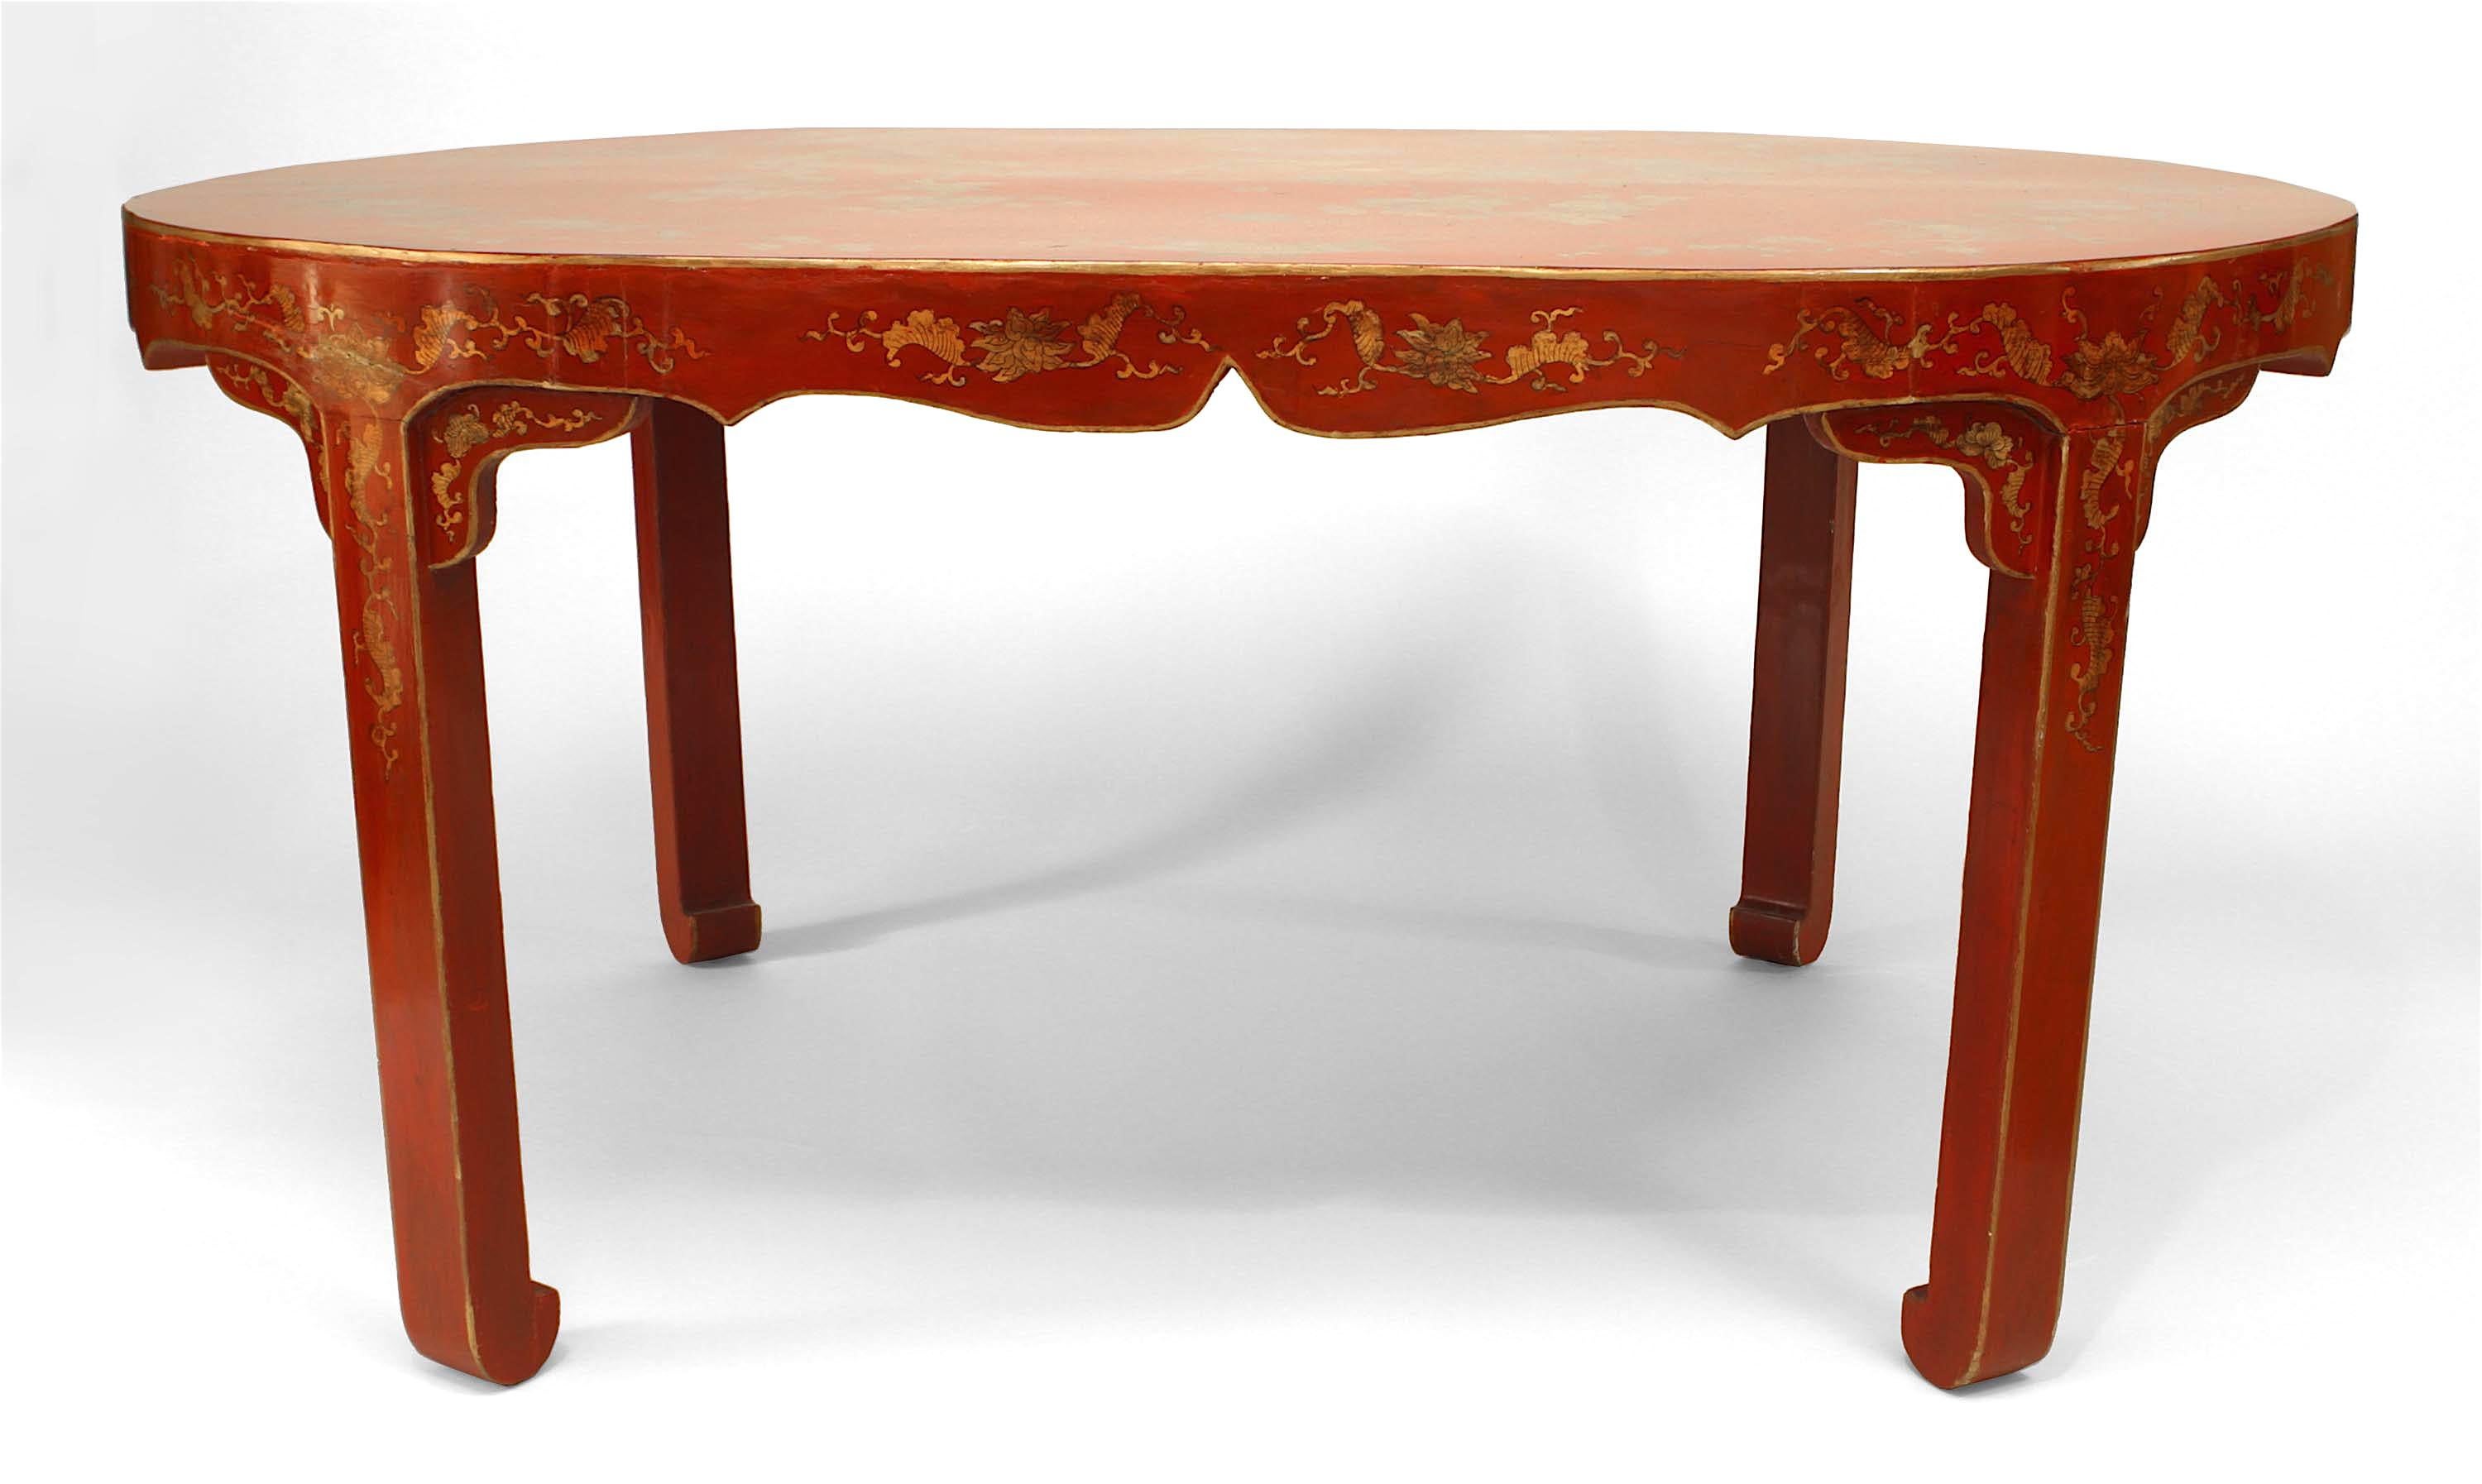 Asian Chinese (19th Century) oval red lacquer and gilt stencilled center table with floral and bird design (Related Item: 050151)
